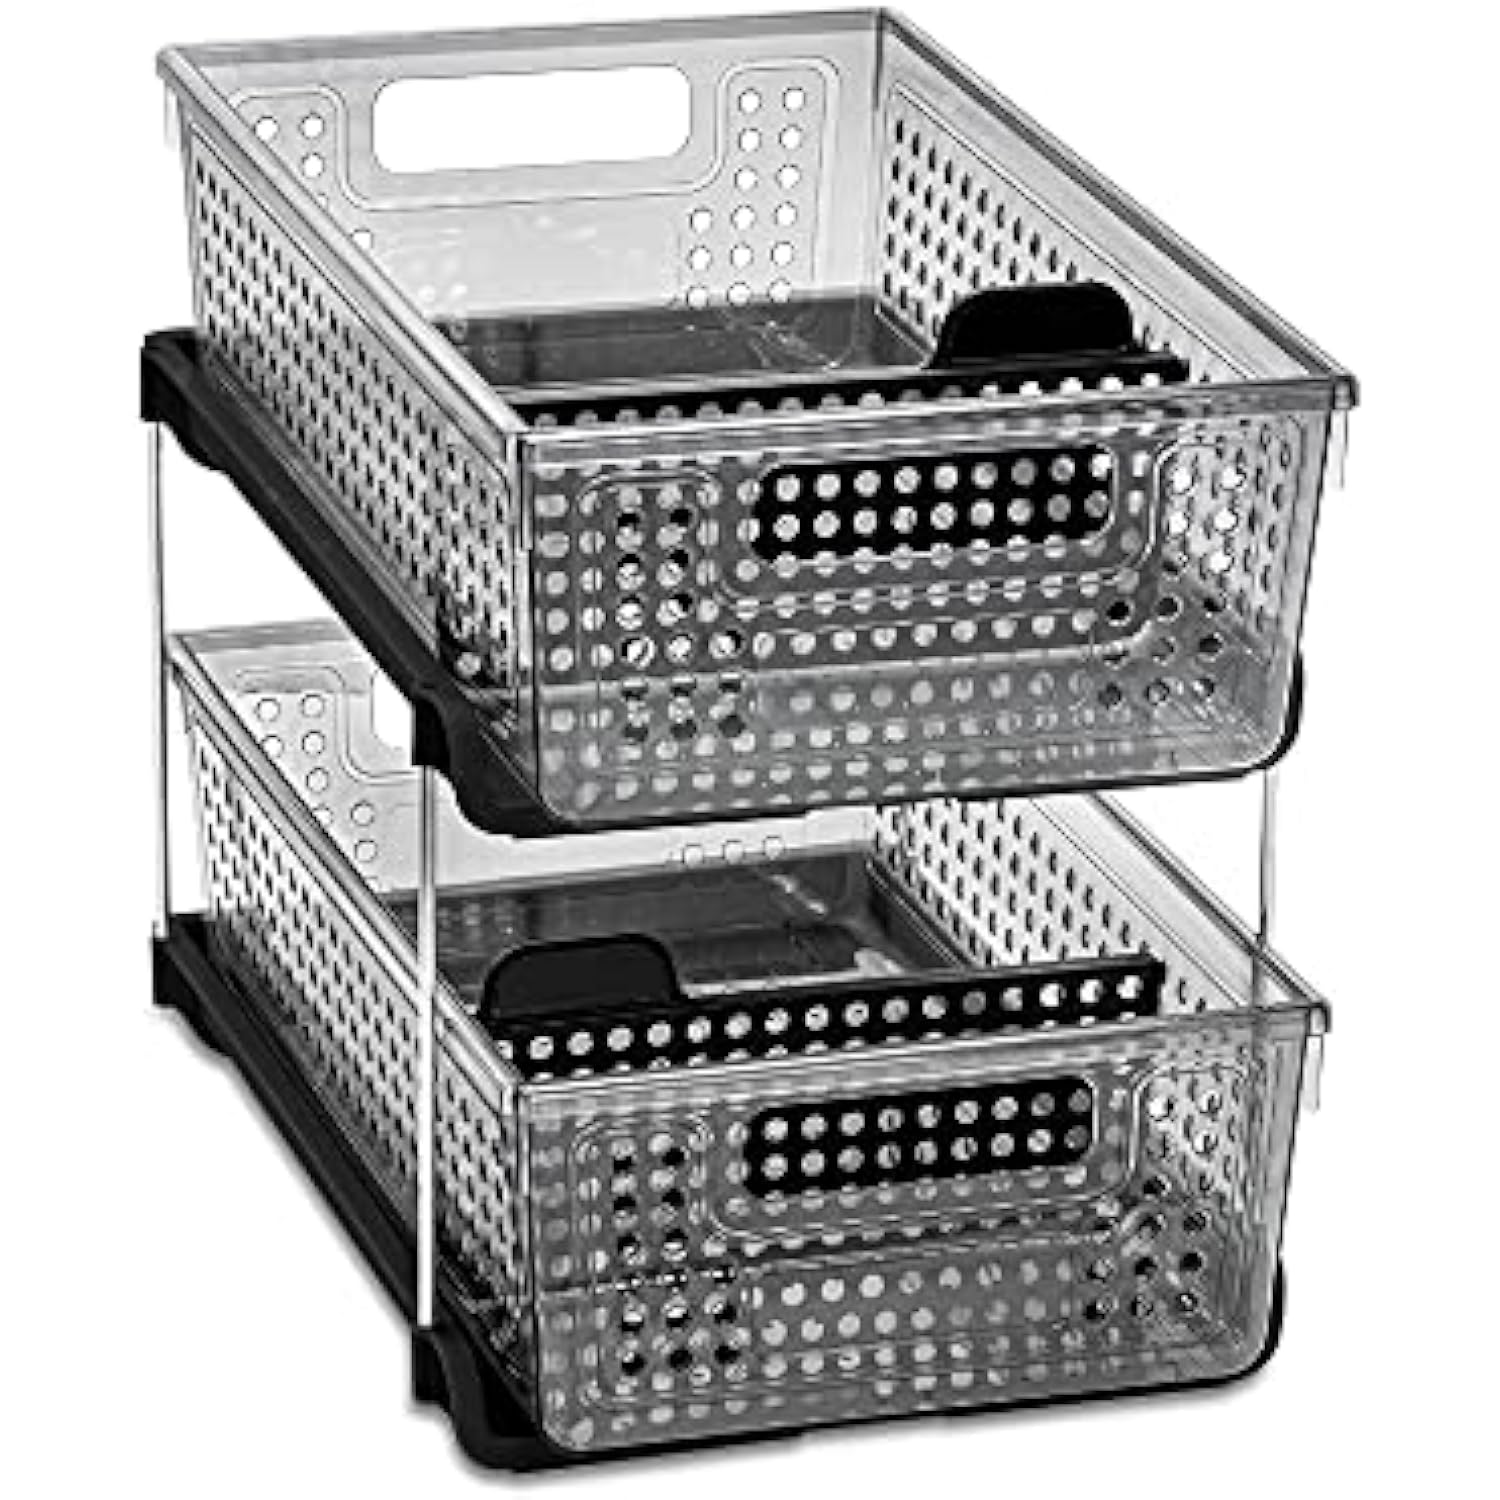 2-Tier Plastic Multipurpose Organizer with Divided Slide-Out Storage Bins, Under Sink and Cabinet Organizer Rack